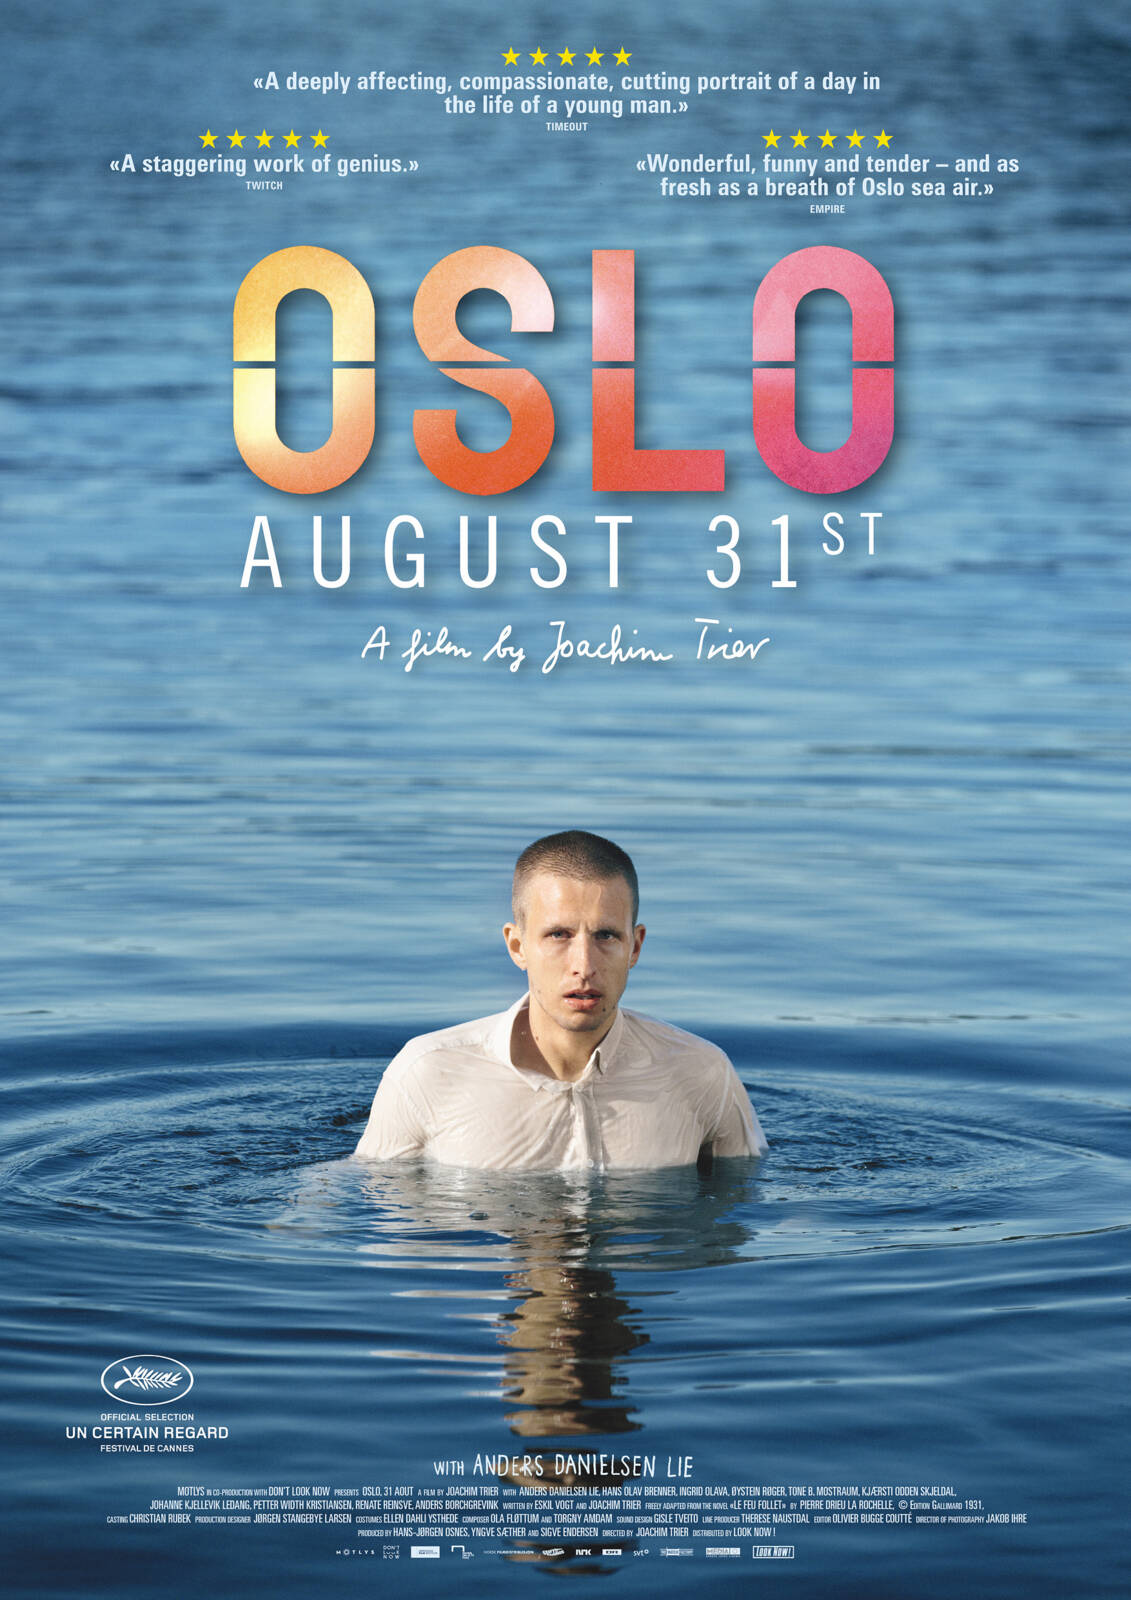 Oslo 31 August